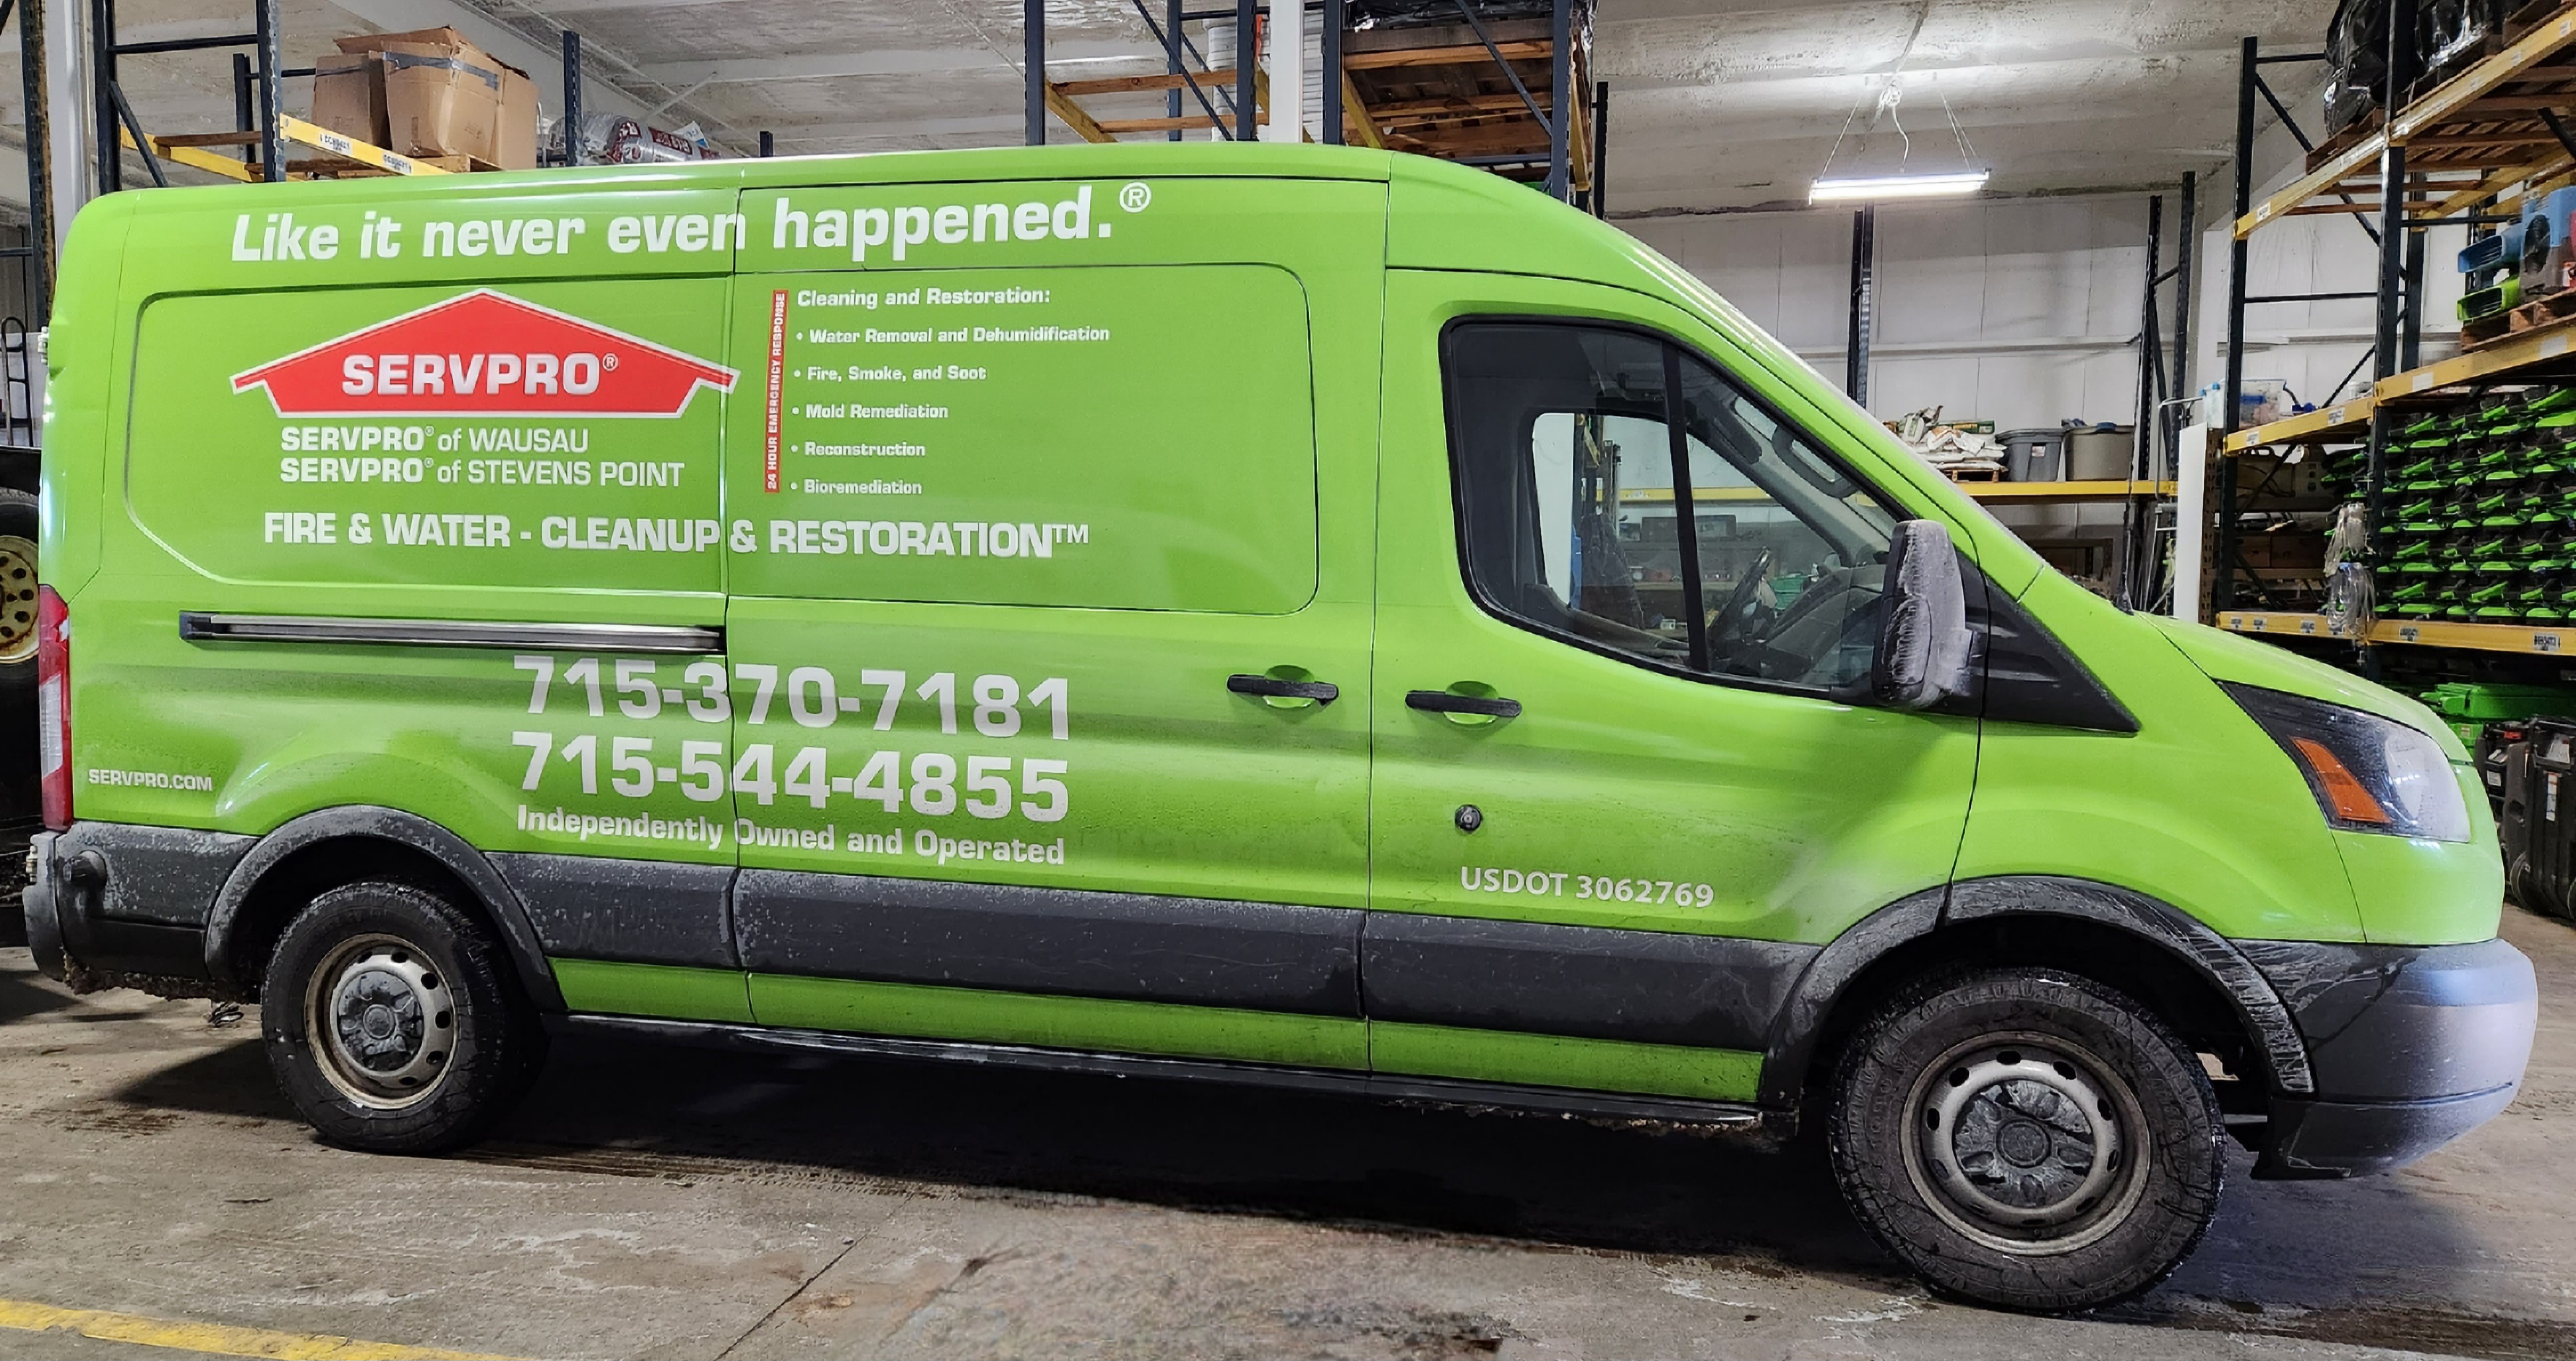 Servpro Vehicles of Stevens Point, Wausau, and Wisconsin Rapids/Marshfield